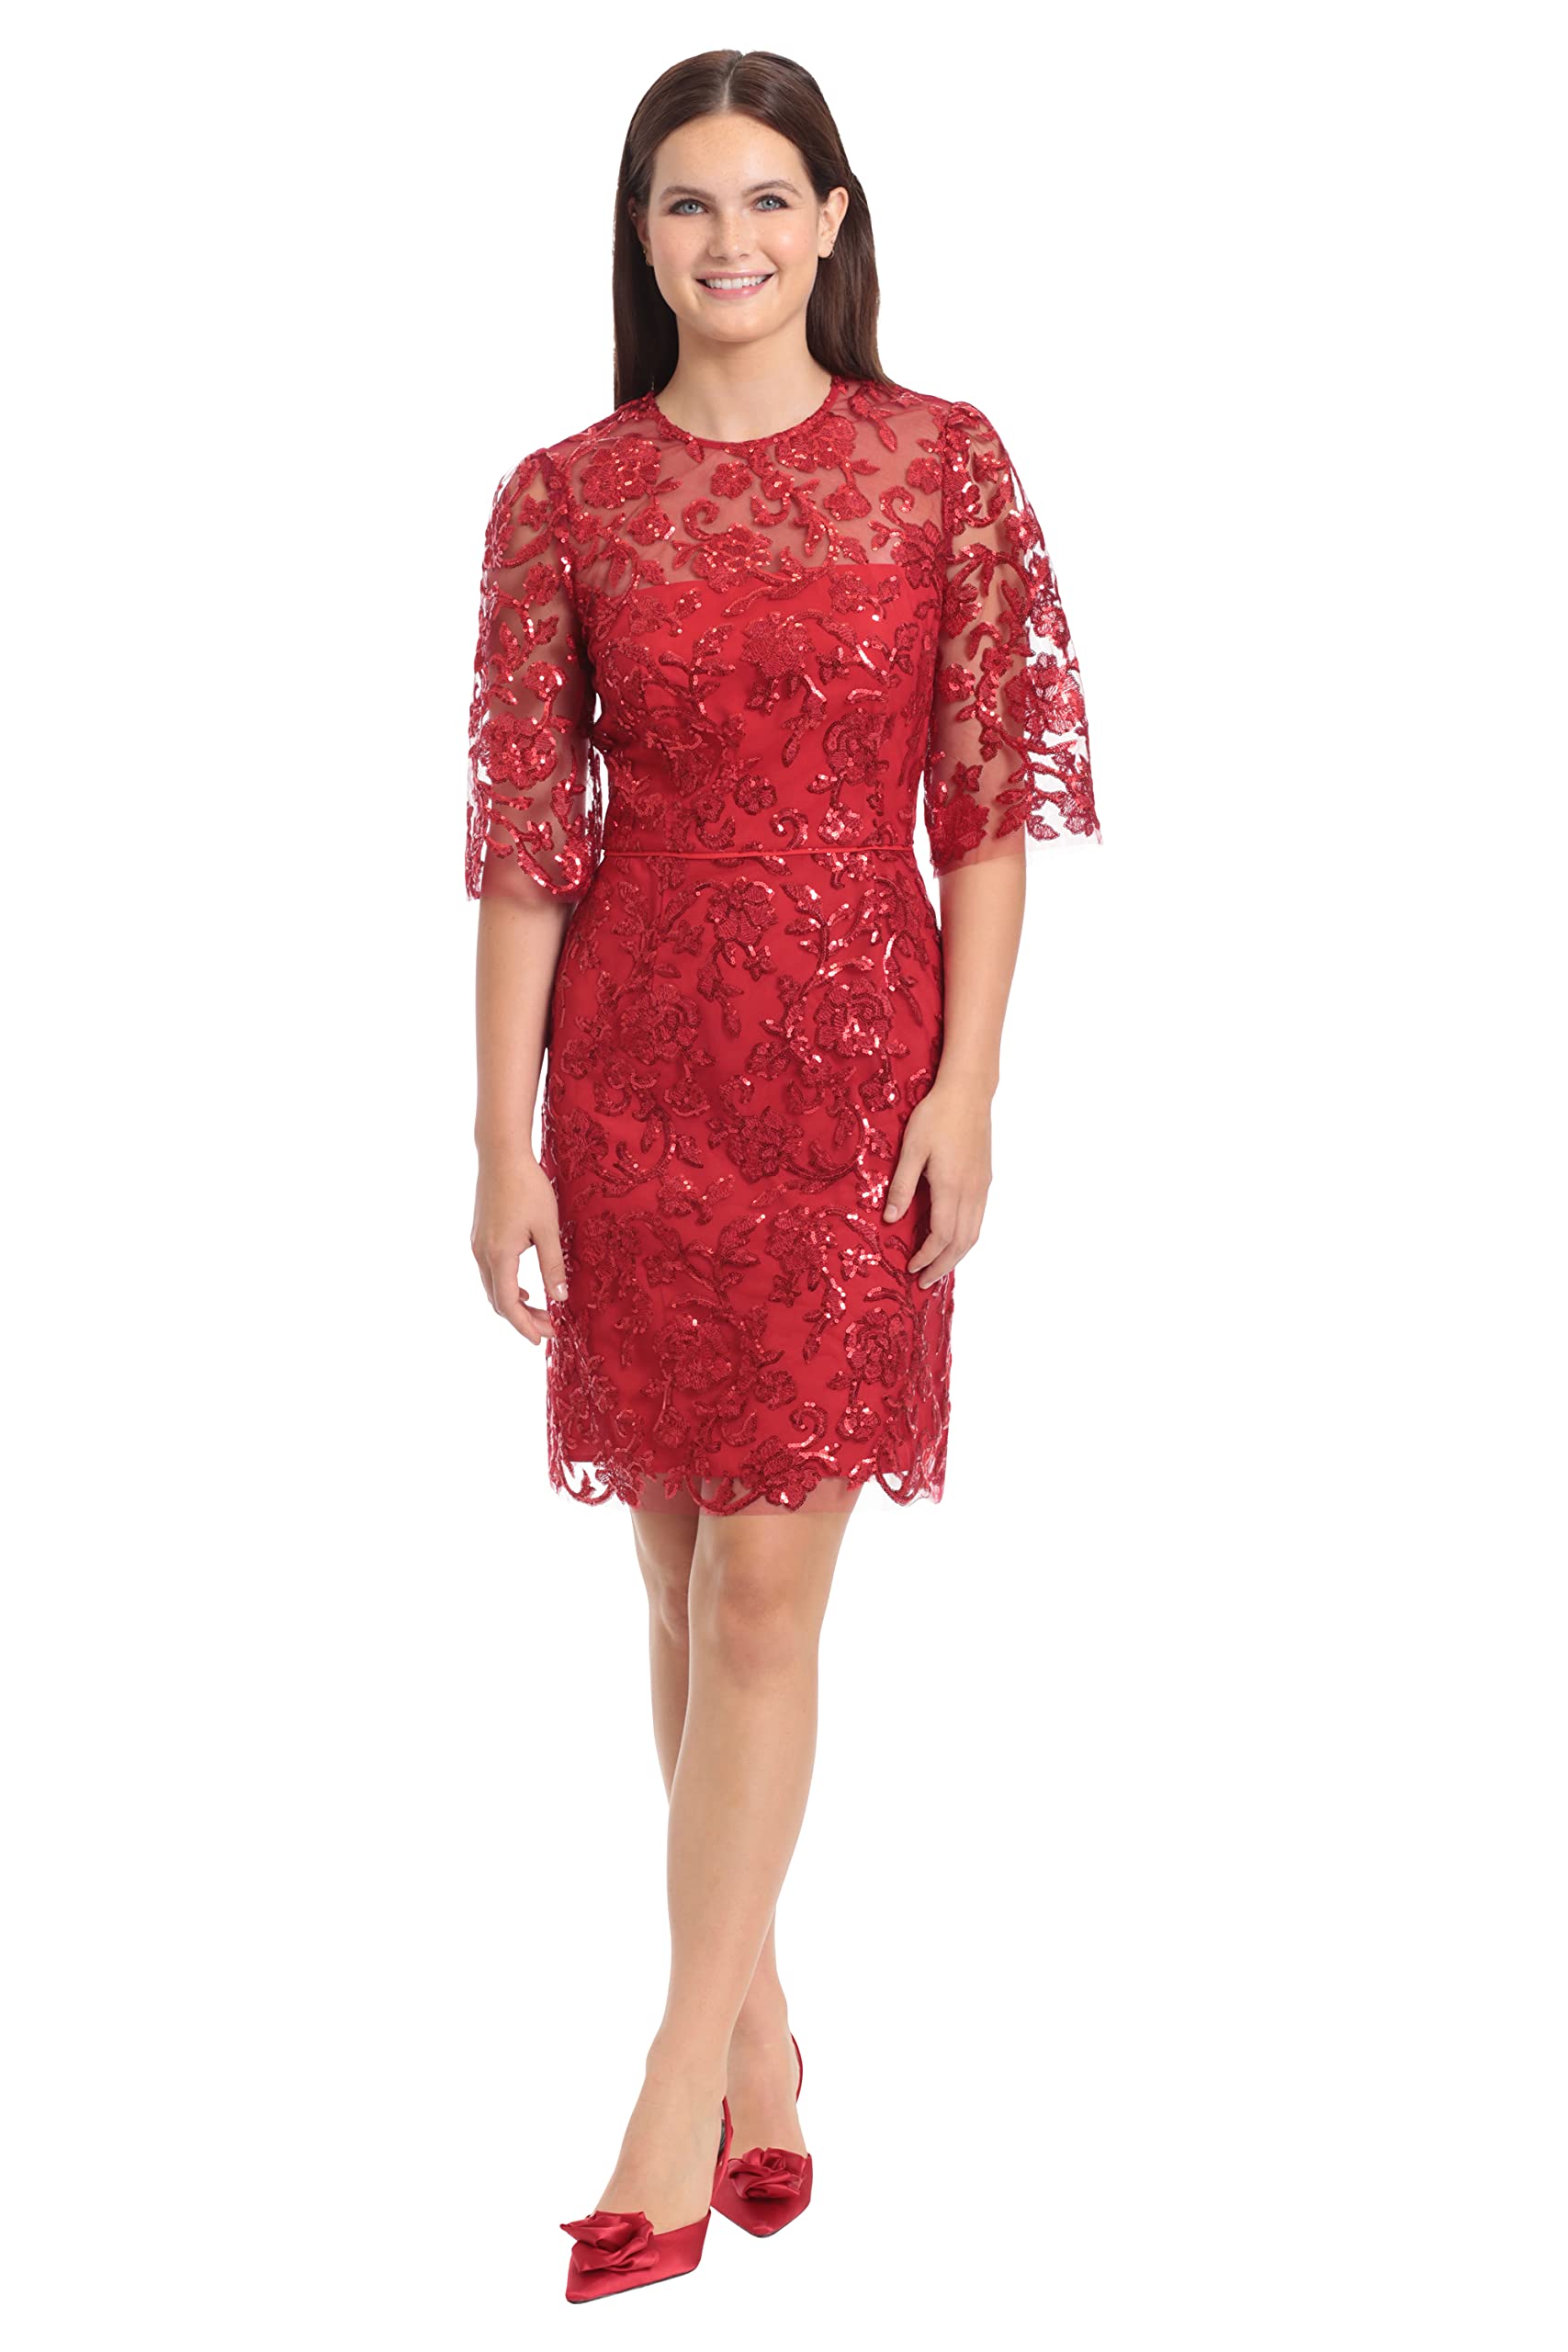 Maggy London Women's Holiday Embroidered Dress Embroidery Occasion Event Party Guest of